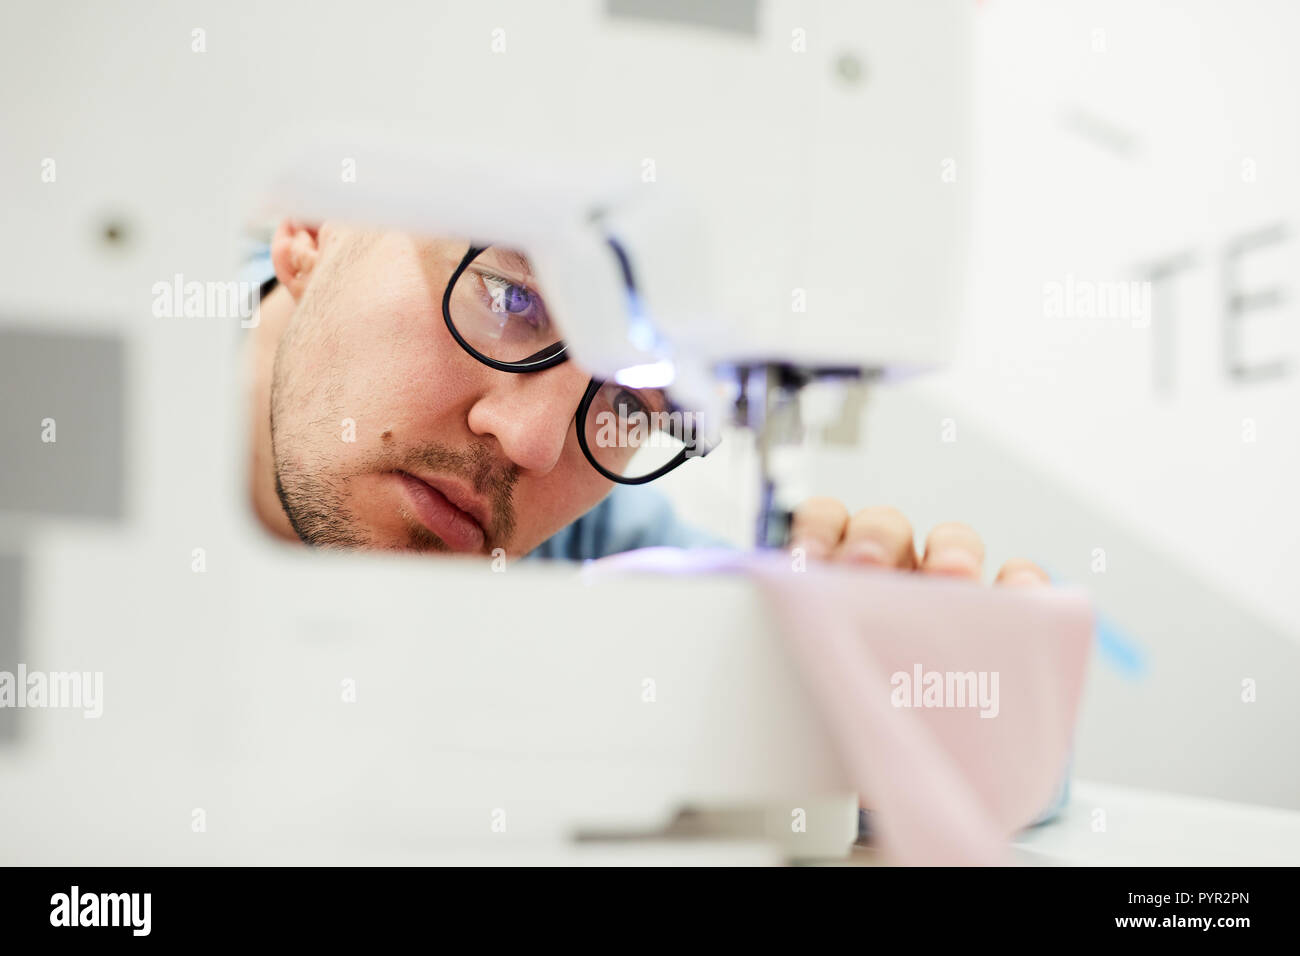 Concentrated tailor checking needle of sewing machine Stock Photo